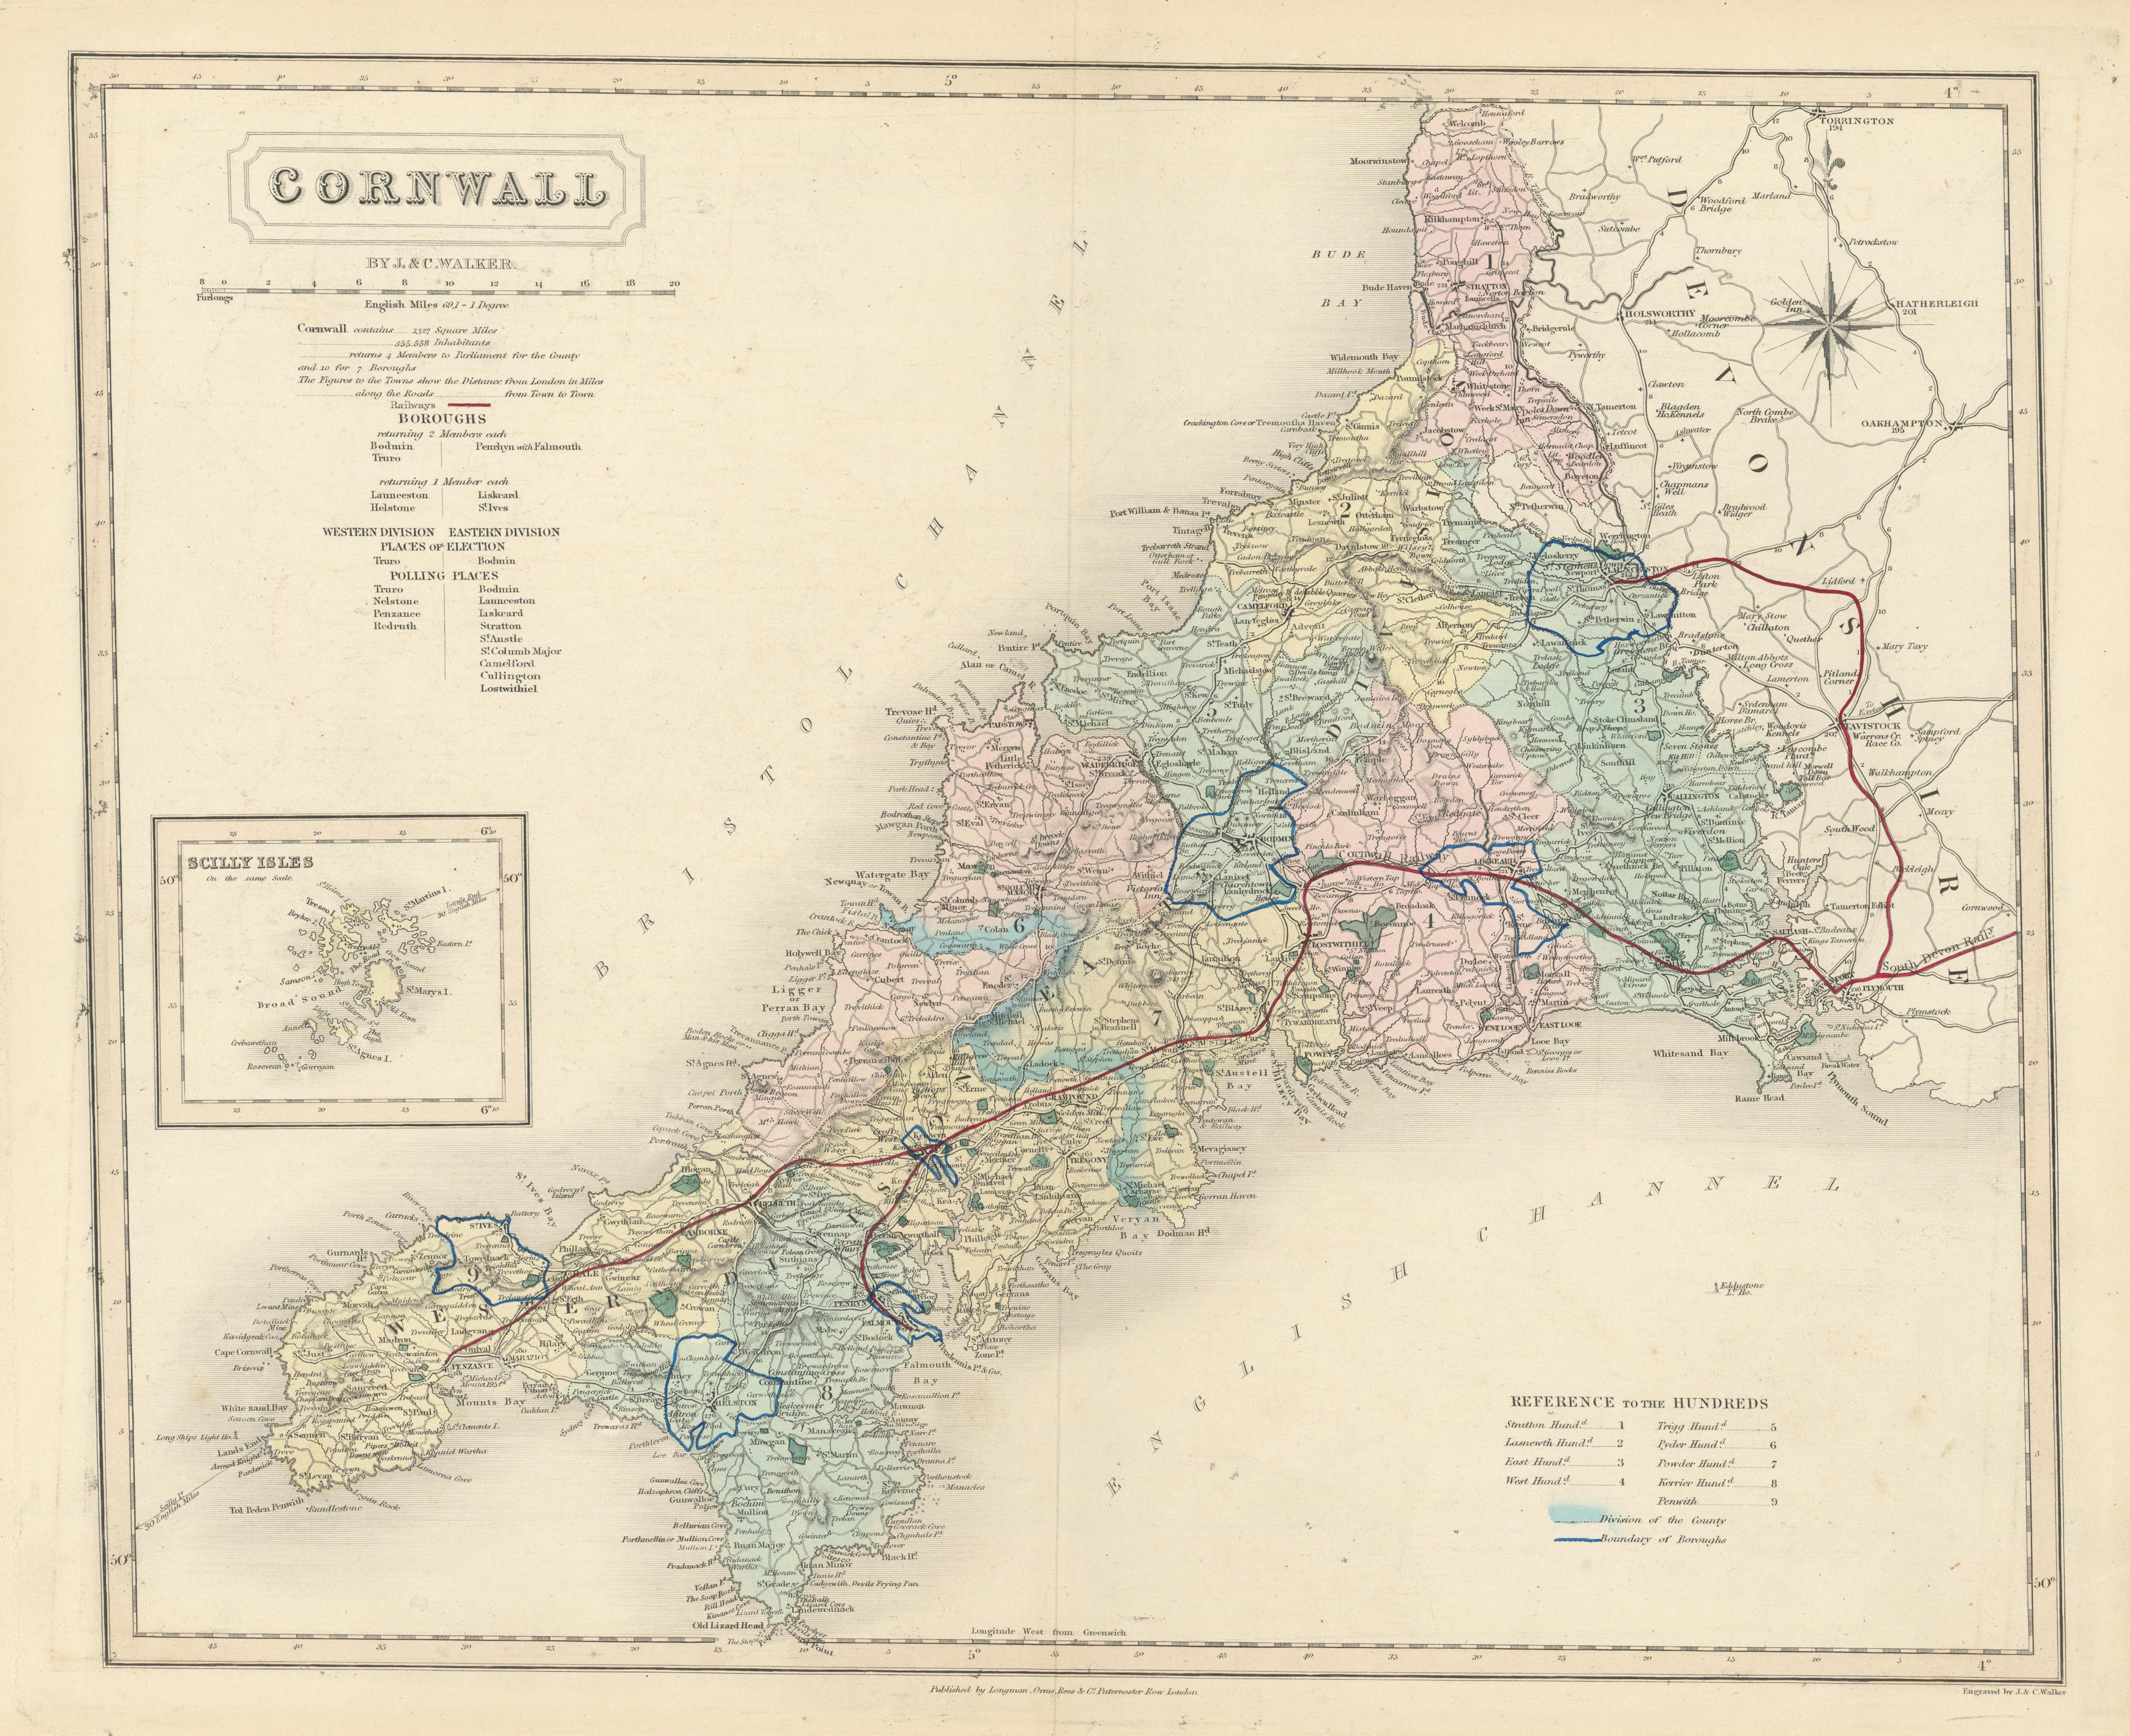 Associate Product Cornwall antique county map by J & C Walker. Railways & boroughs 1870 old